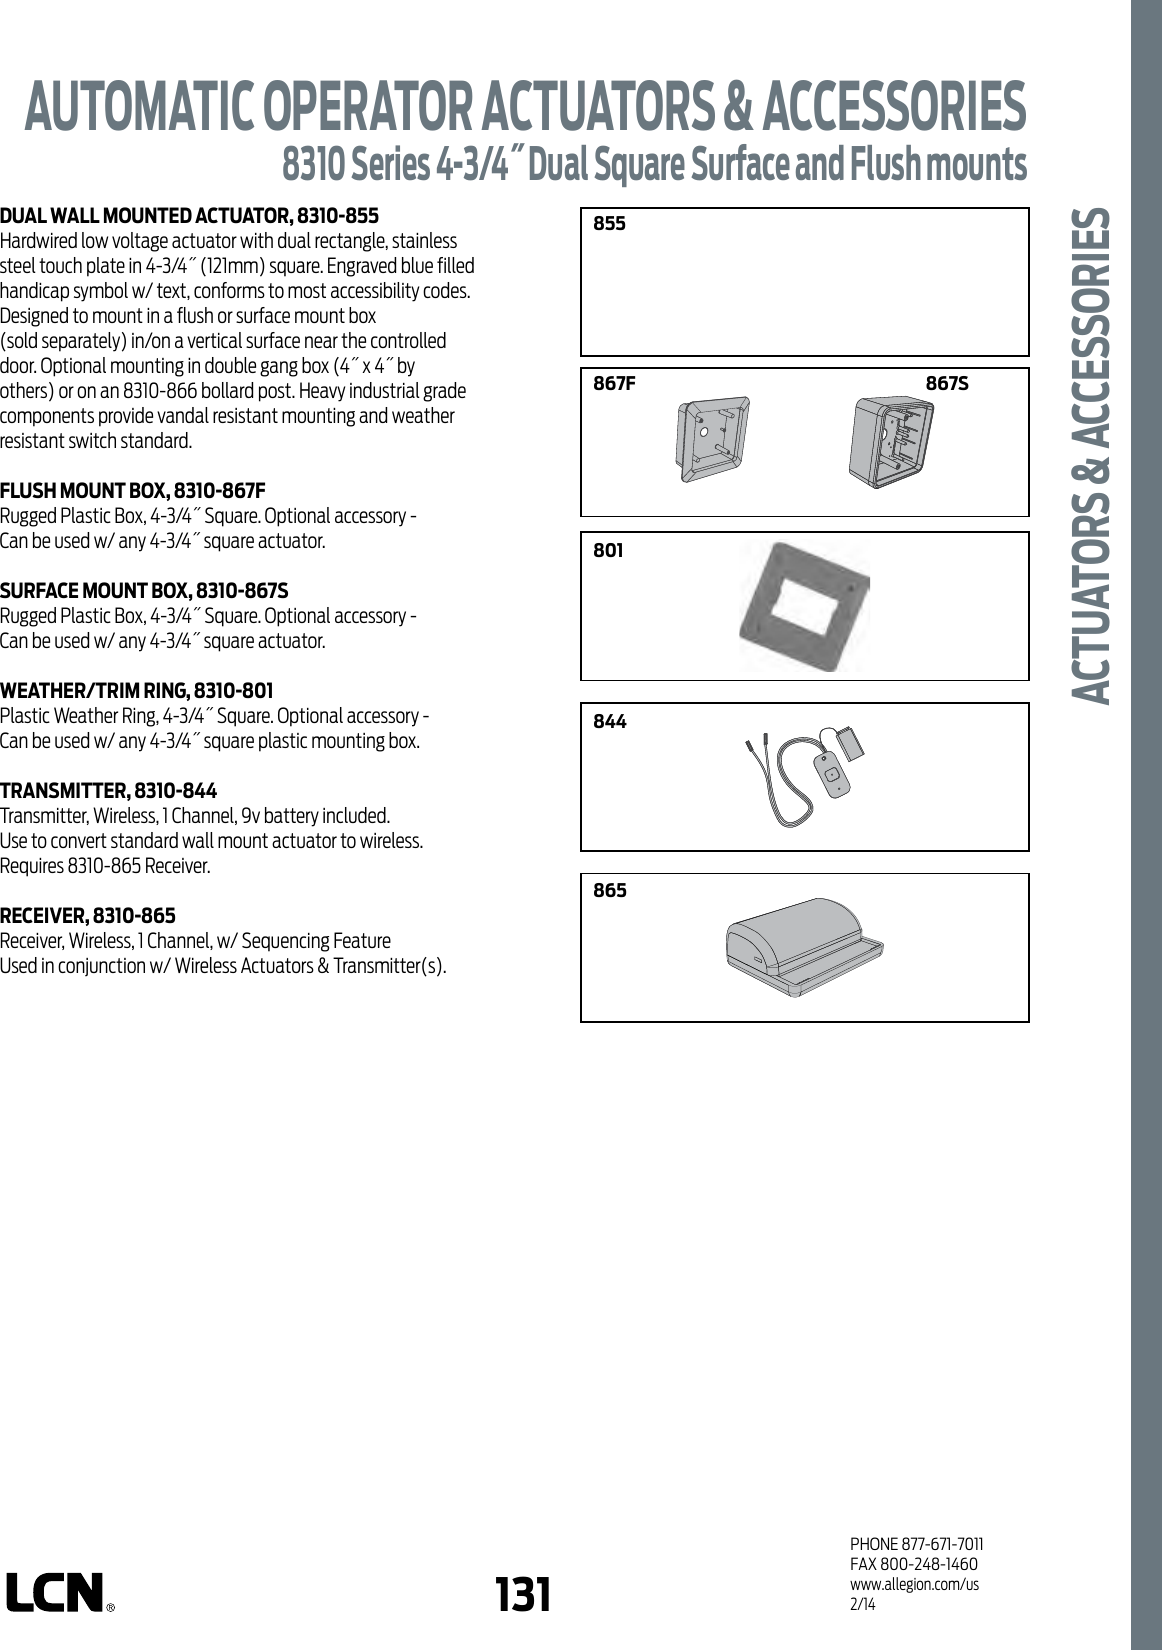 Page 9 of 9 - LCN  8310 Series Automatic Operator Actuators & Accessories Cut Sheet